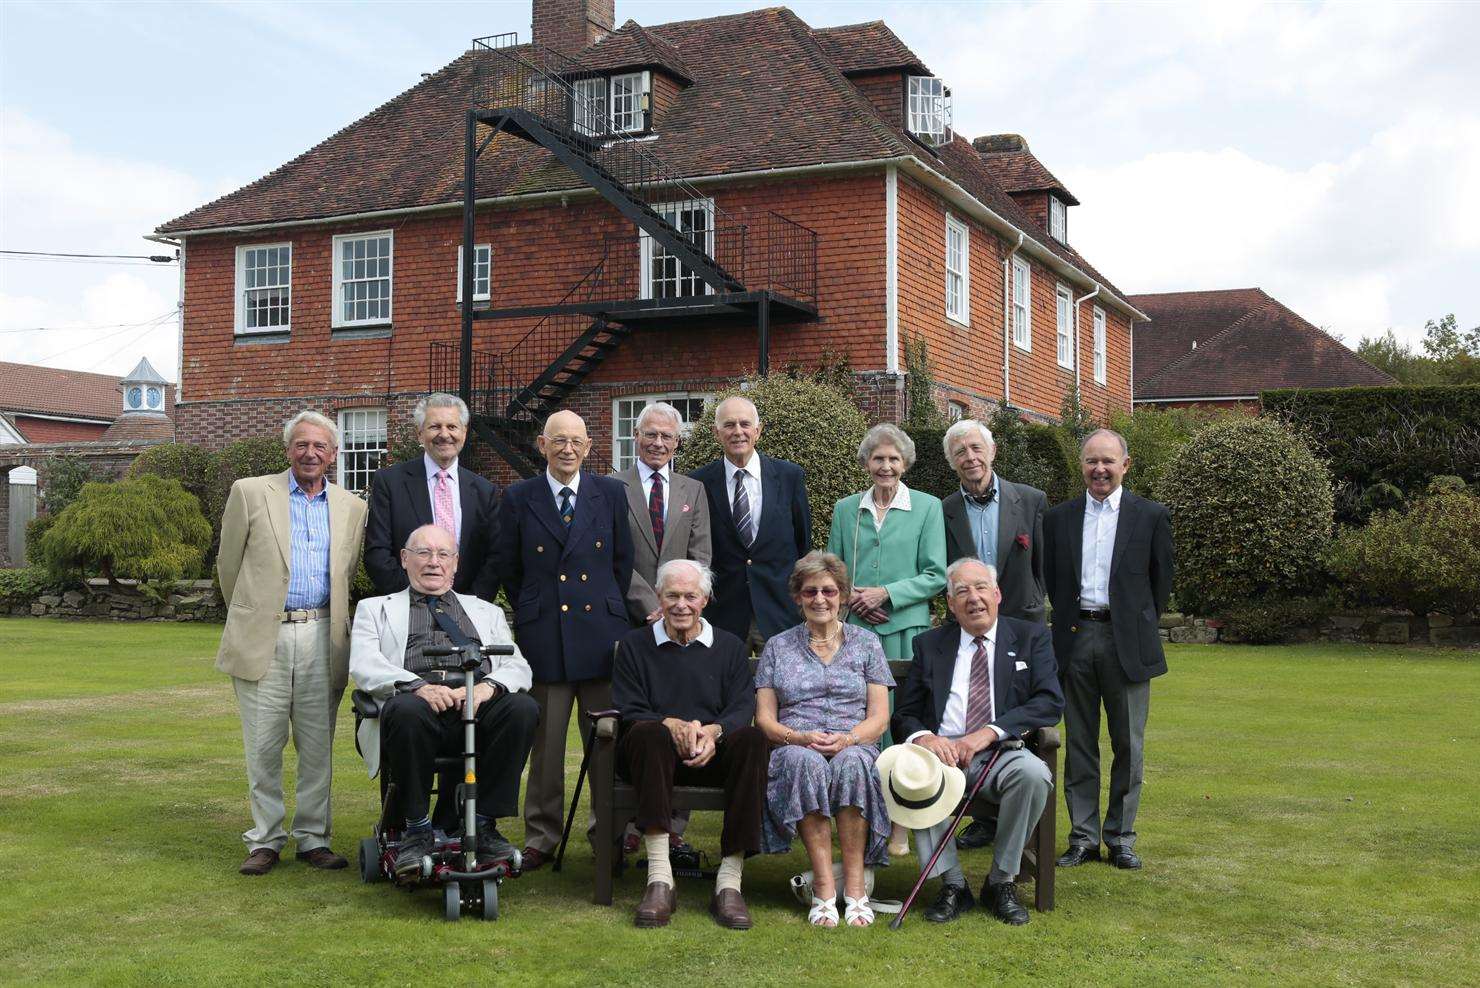 Former pupils on the lawn where the original school photo was taken 75 years ago